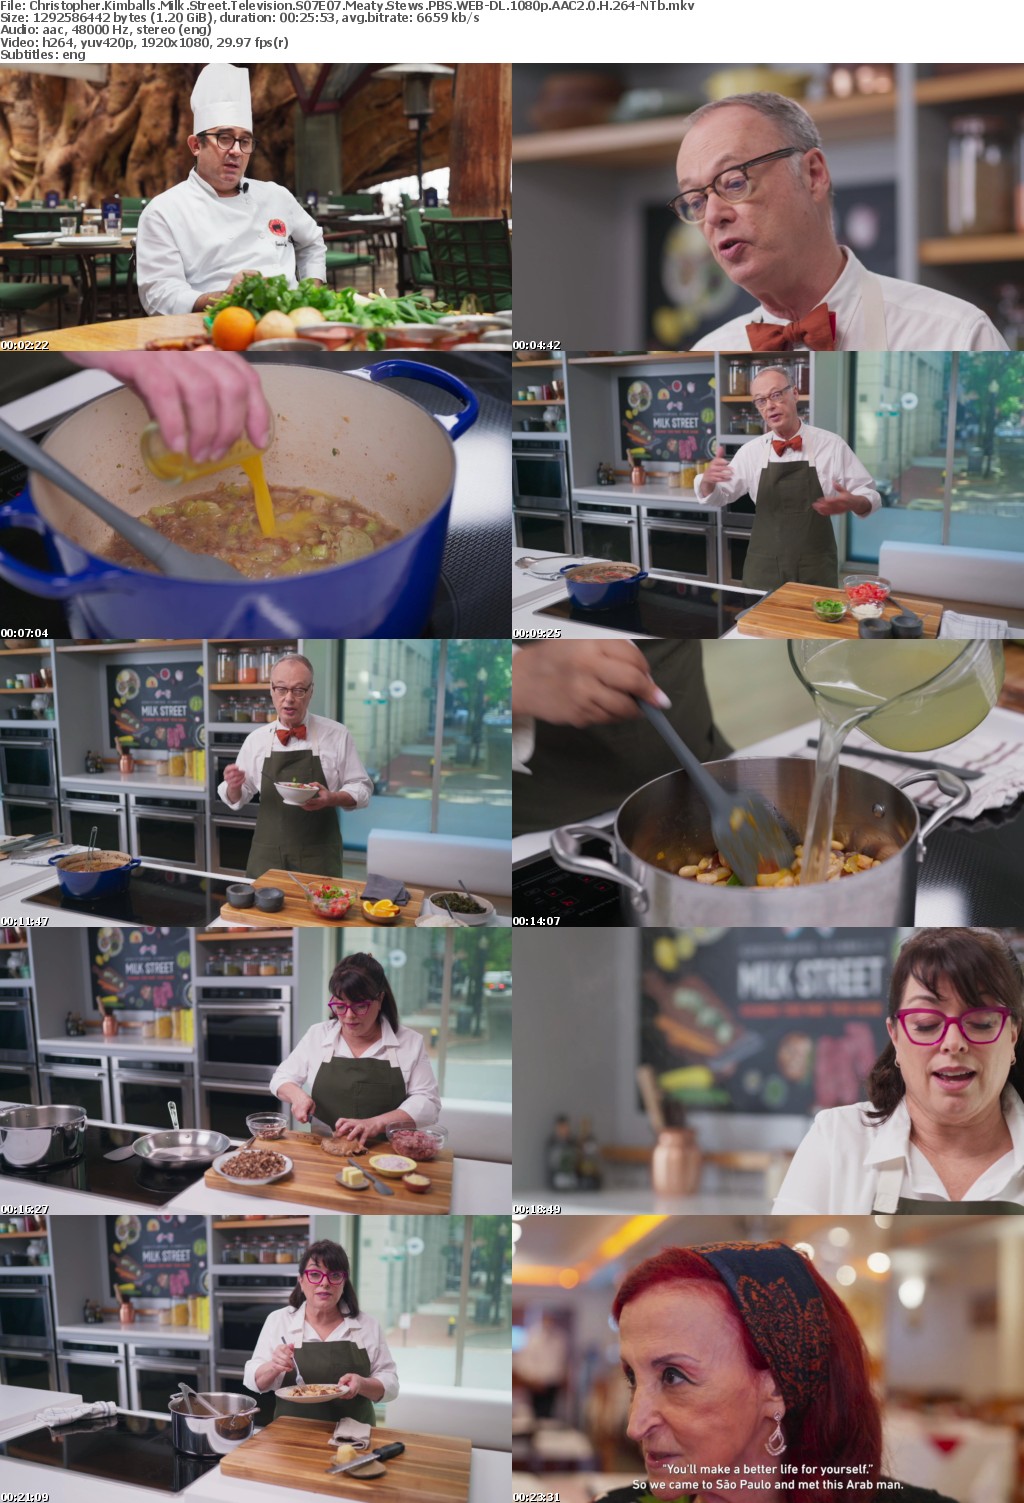 Christopher Kimballs Milk Street Television S07E07 Meaty Stews PBS WEB-DL 1080p AAC2 0 H 264-NTb